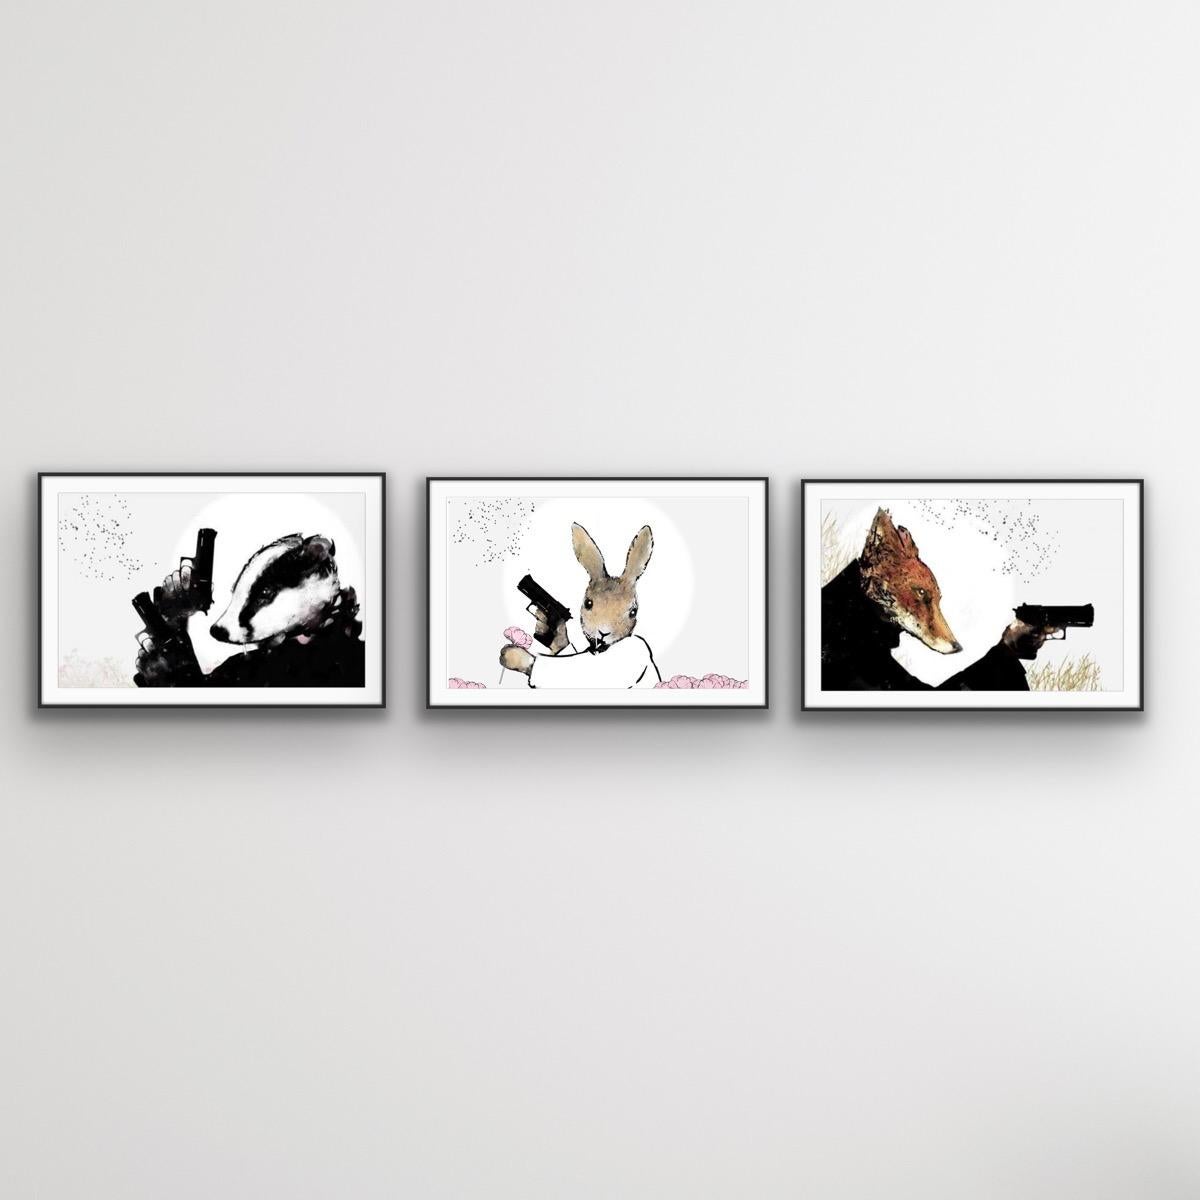 Harry Bunce Animal Print - Triptych of Rural Resistance Series, Animal print, Bunny, Abstract print